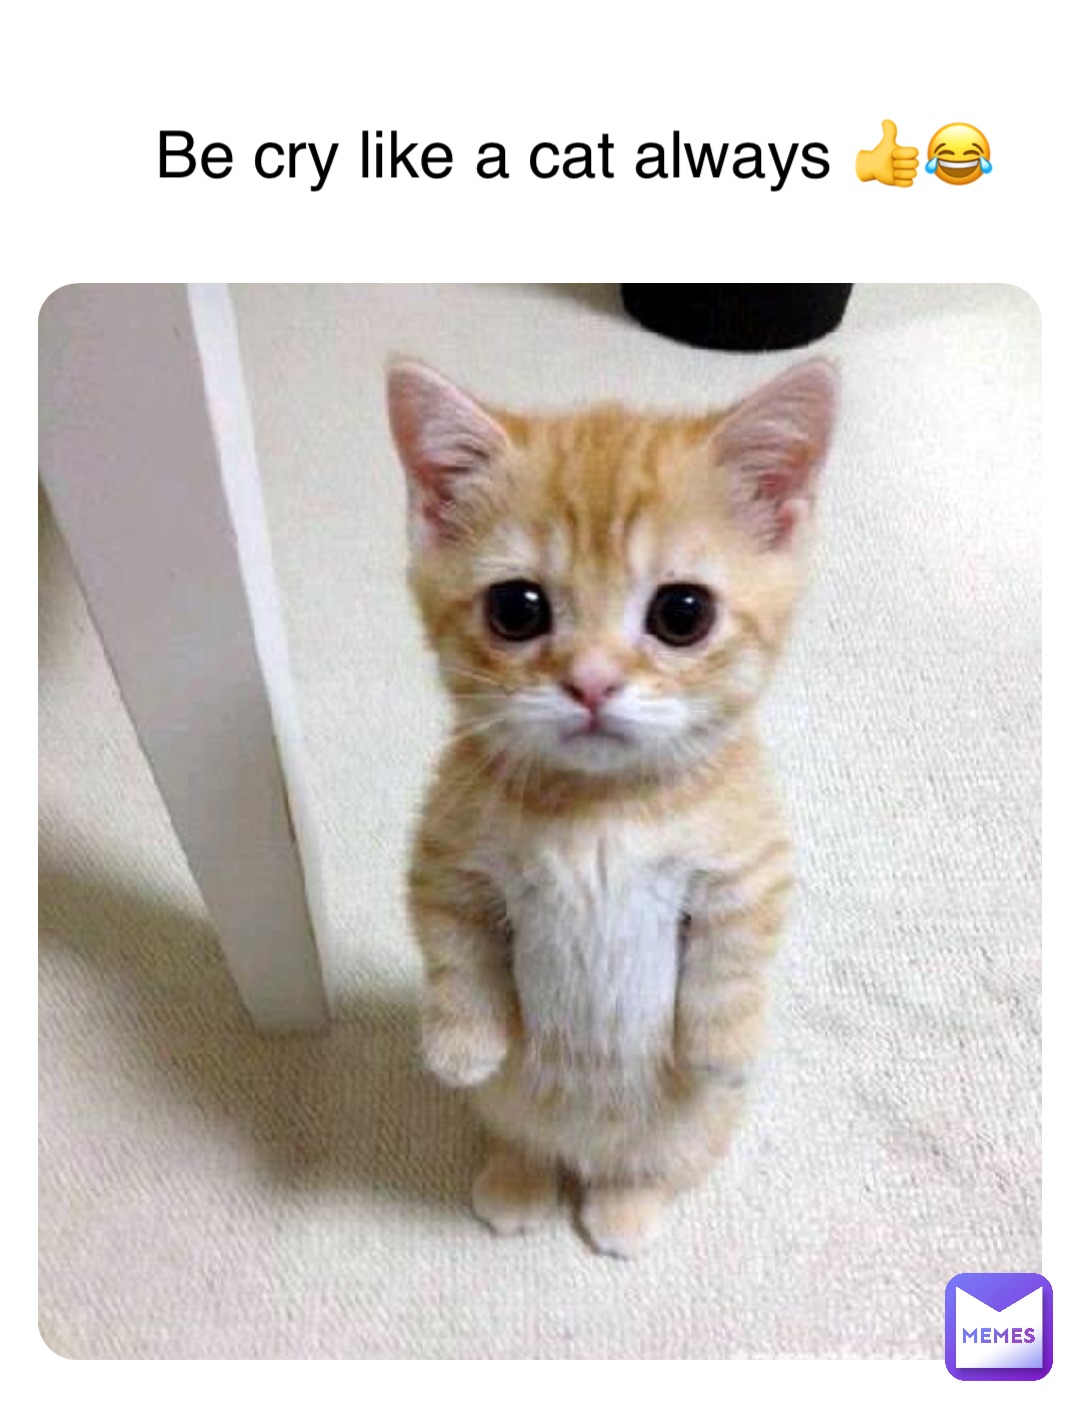 Be cry like a cat always 👍😂